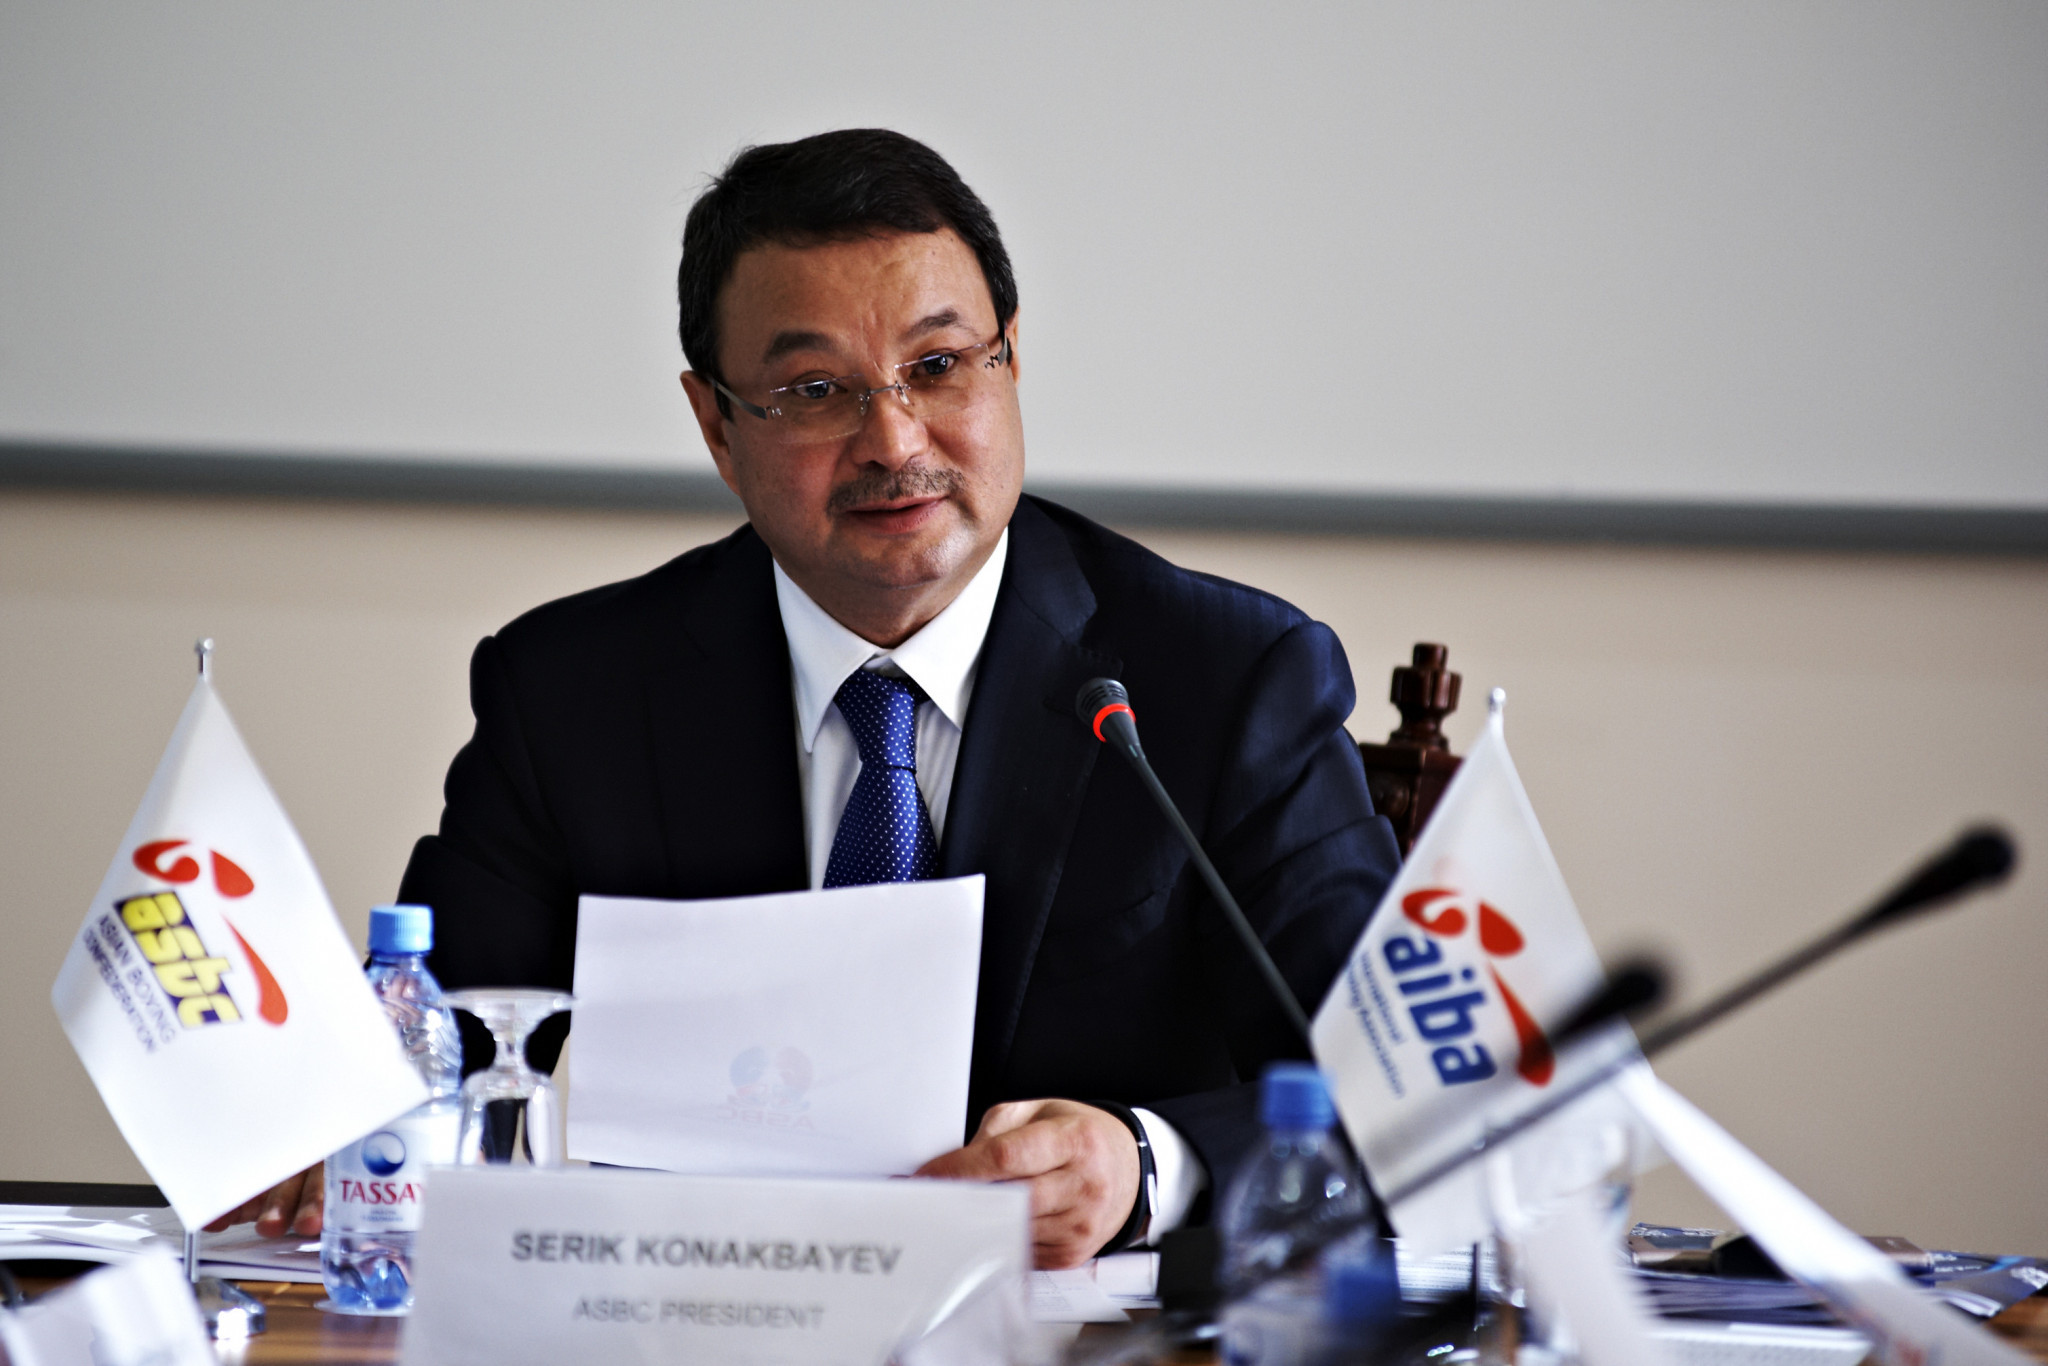 AIBA has accused Serik Konakbayev of setting out to destroy data belonging to the ASBC ©ASBC